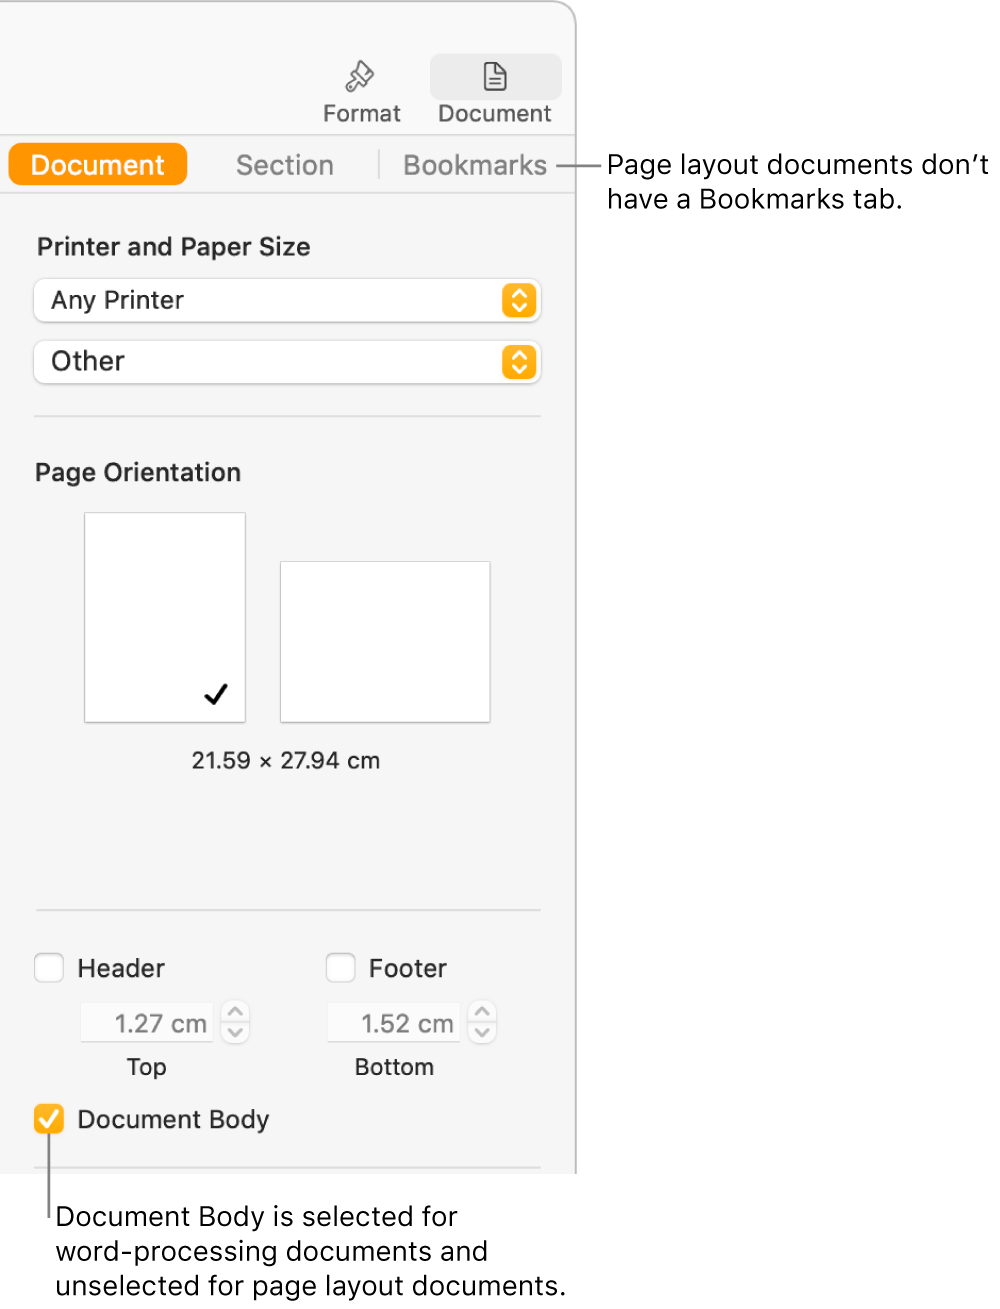 The Format sidebar with the Document, Section and Bookmarks tabs at the top. The Document tab is selected and a callout to the Bookmarks tab says that page layout documents don’t have a Bookmarks tab. The Document Body tick box is selected, which also indicates that this is a word-processing document.